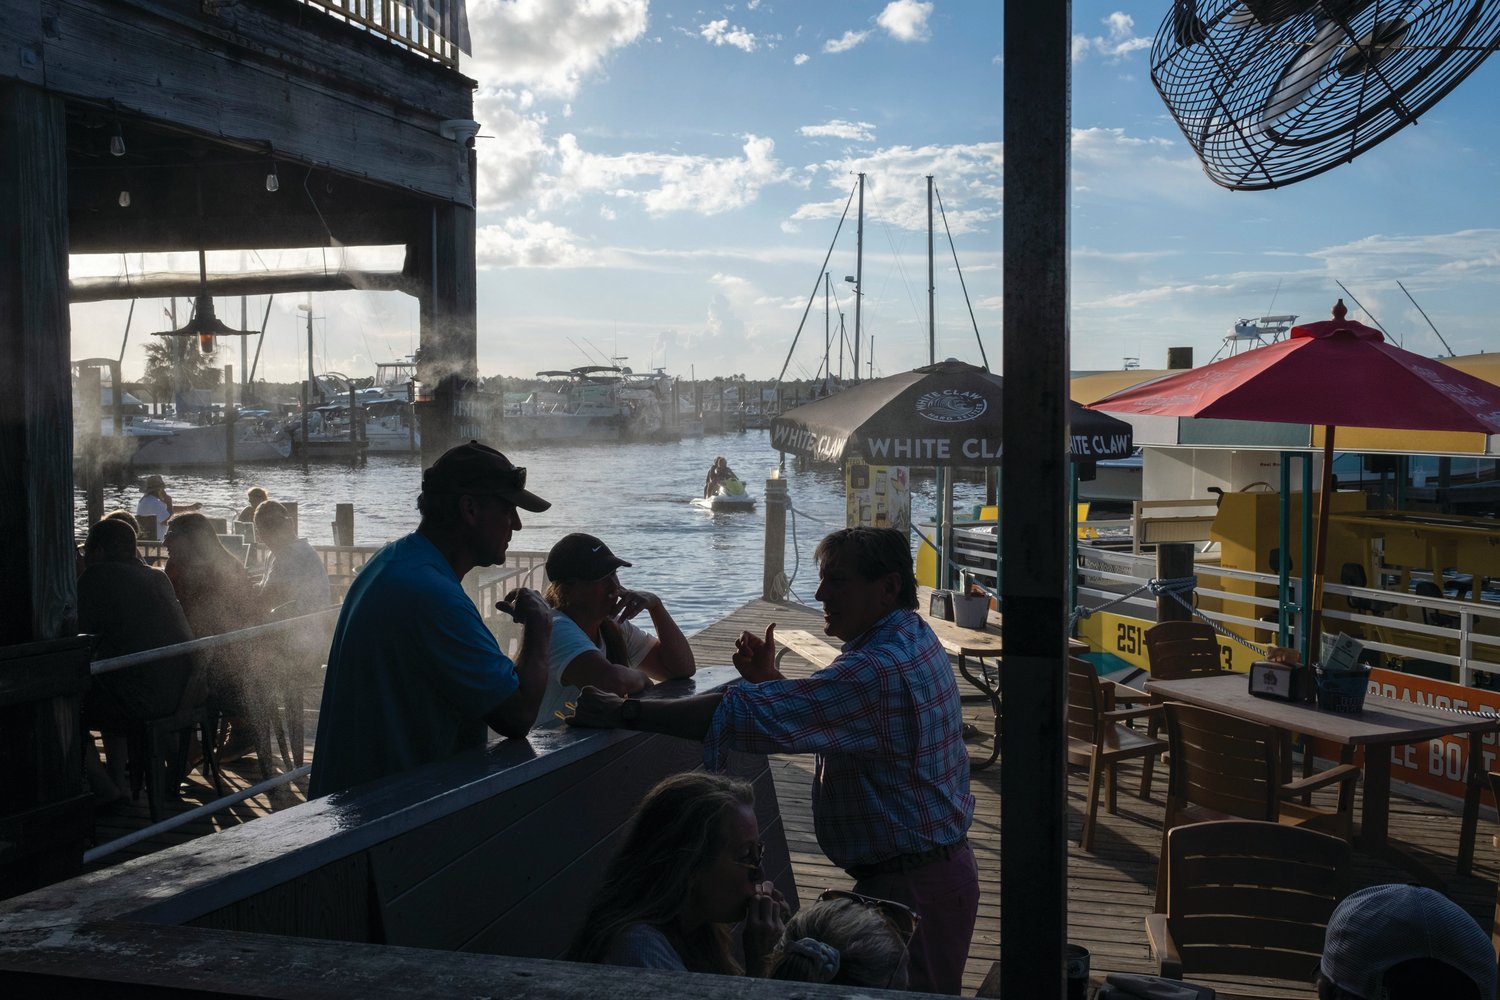 Oso at Bear Point Harbor in Orange Beach has multiple spaces to drink, dine or listen to music.